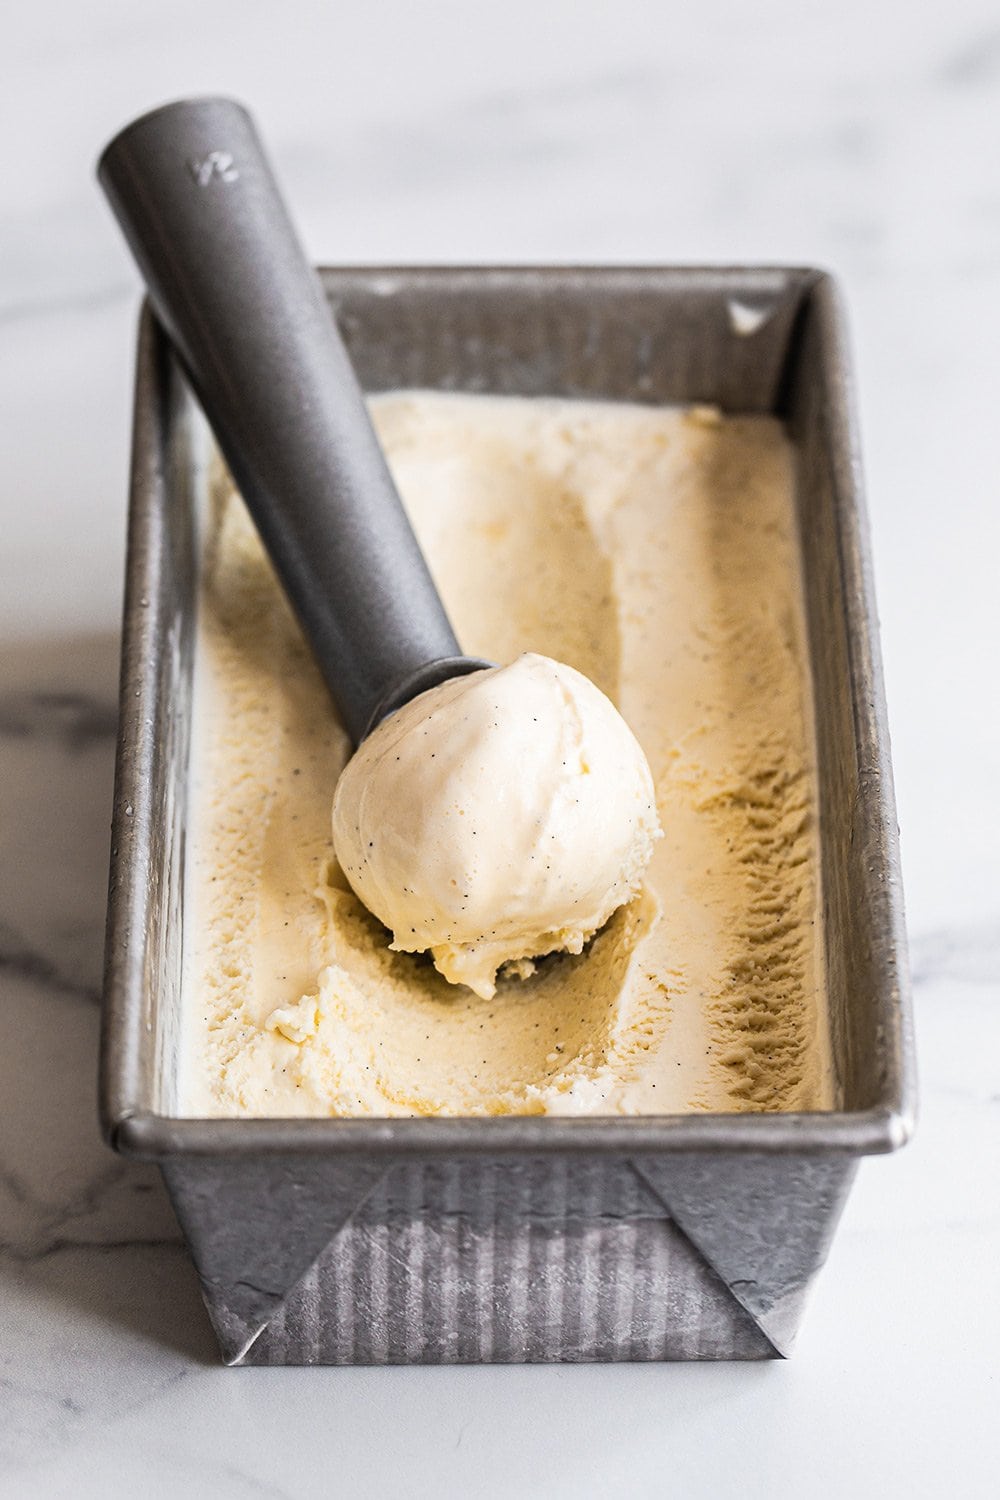 a loaf pan full of homemade French vanilla ice cream, with an ice cream scoop, ready to serve